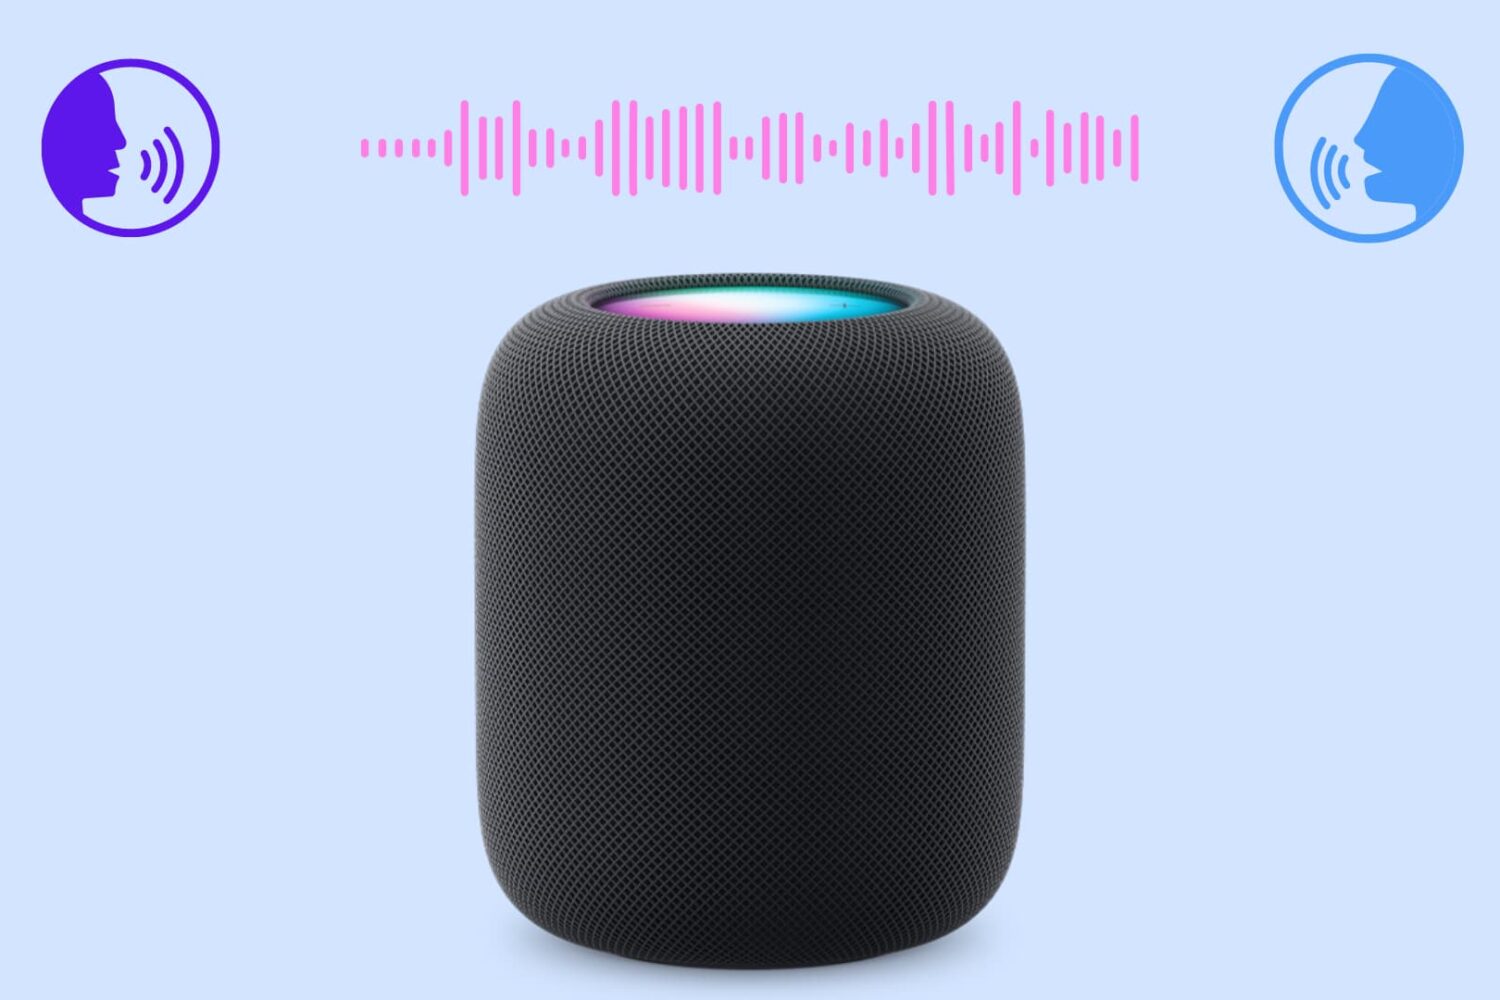 HomePod with people and sound icons to illustrate voice recognition